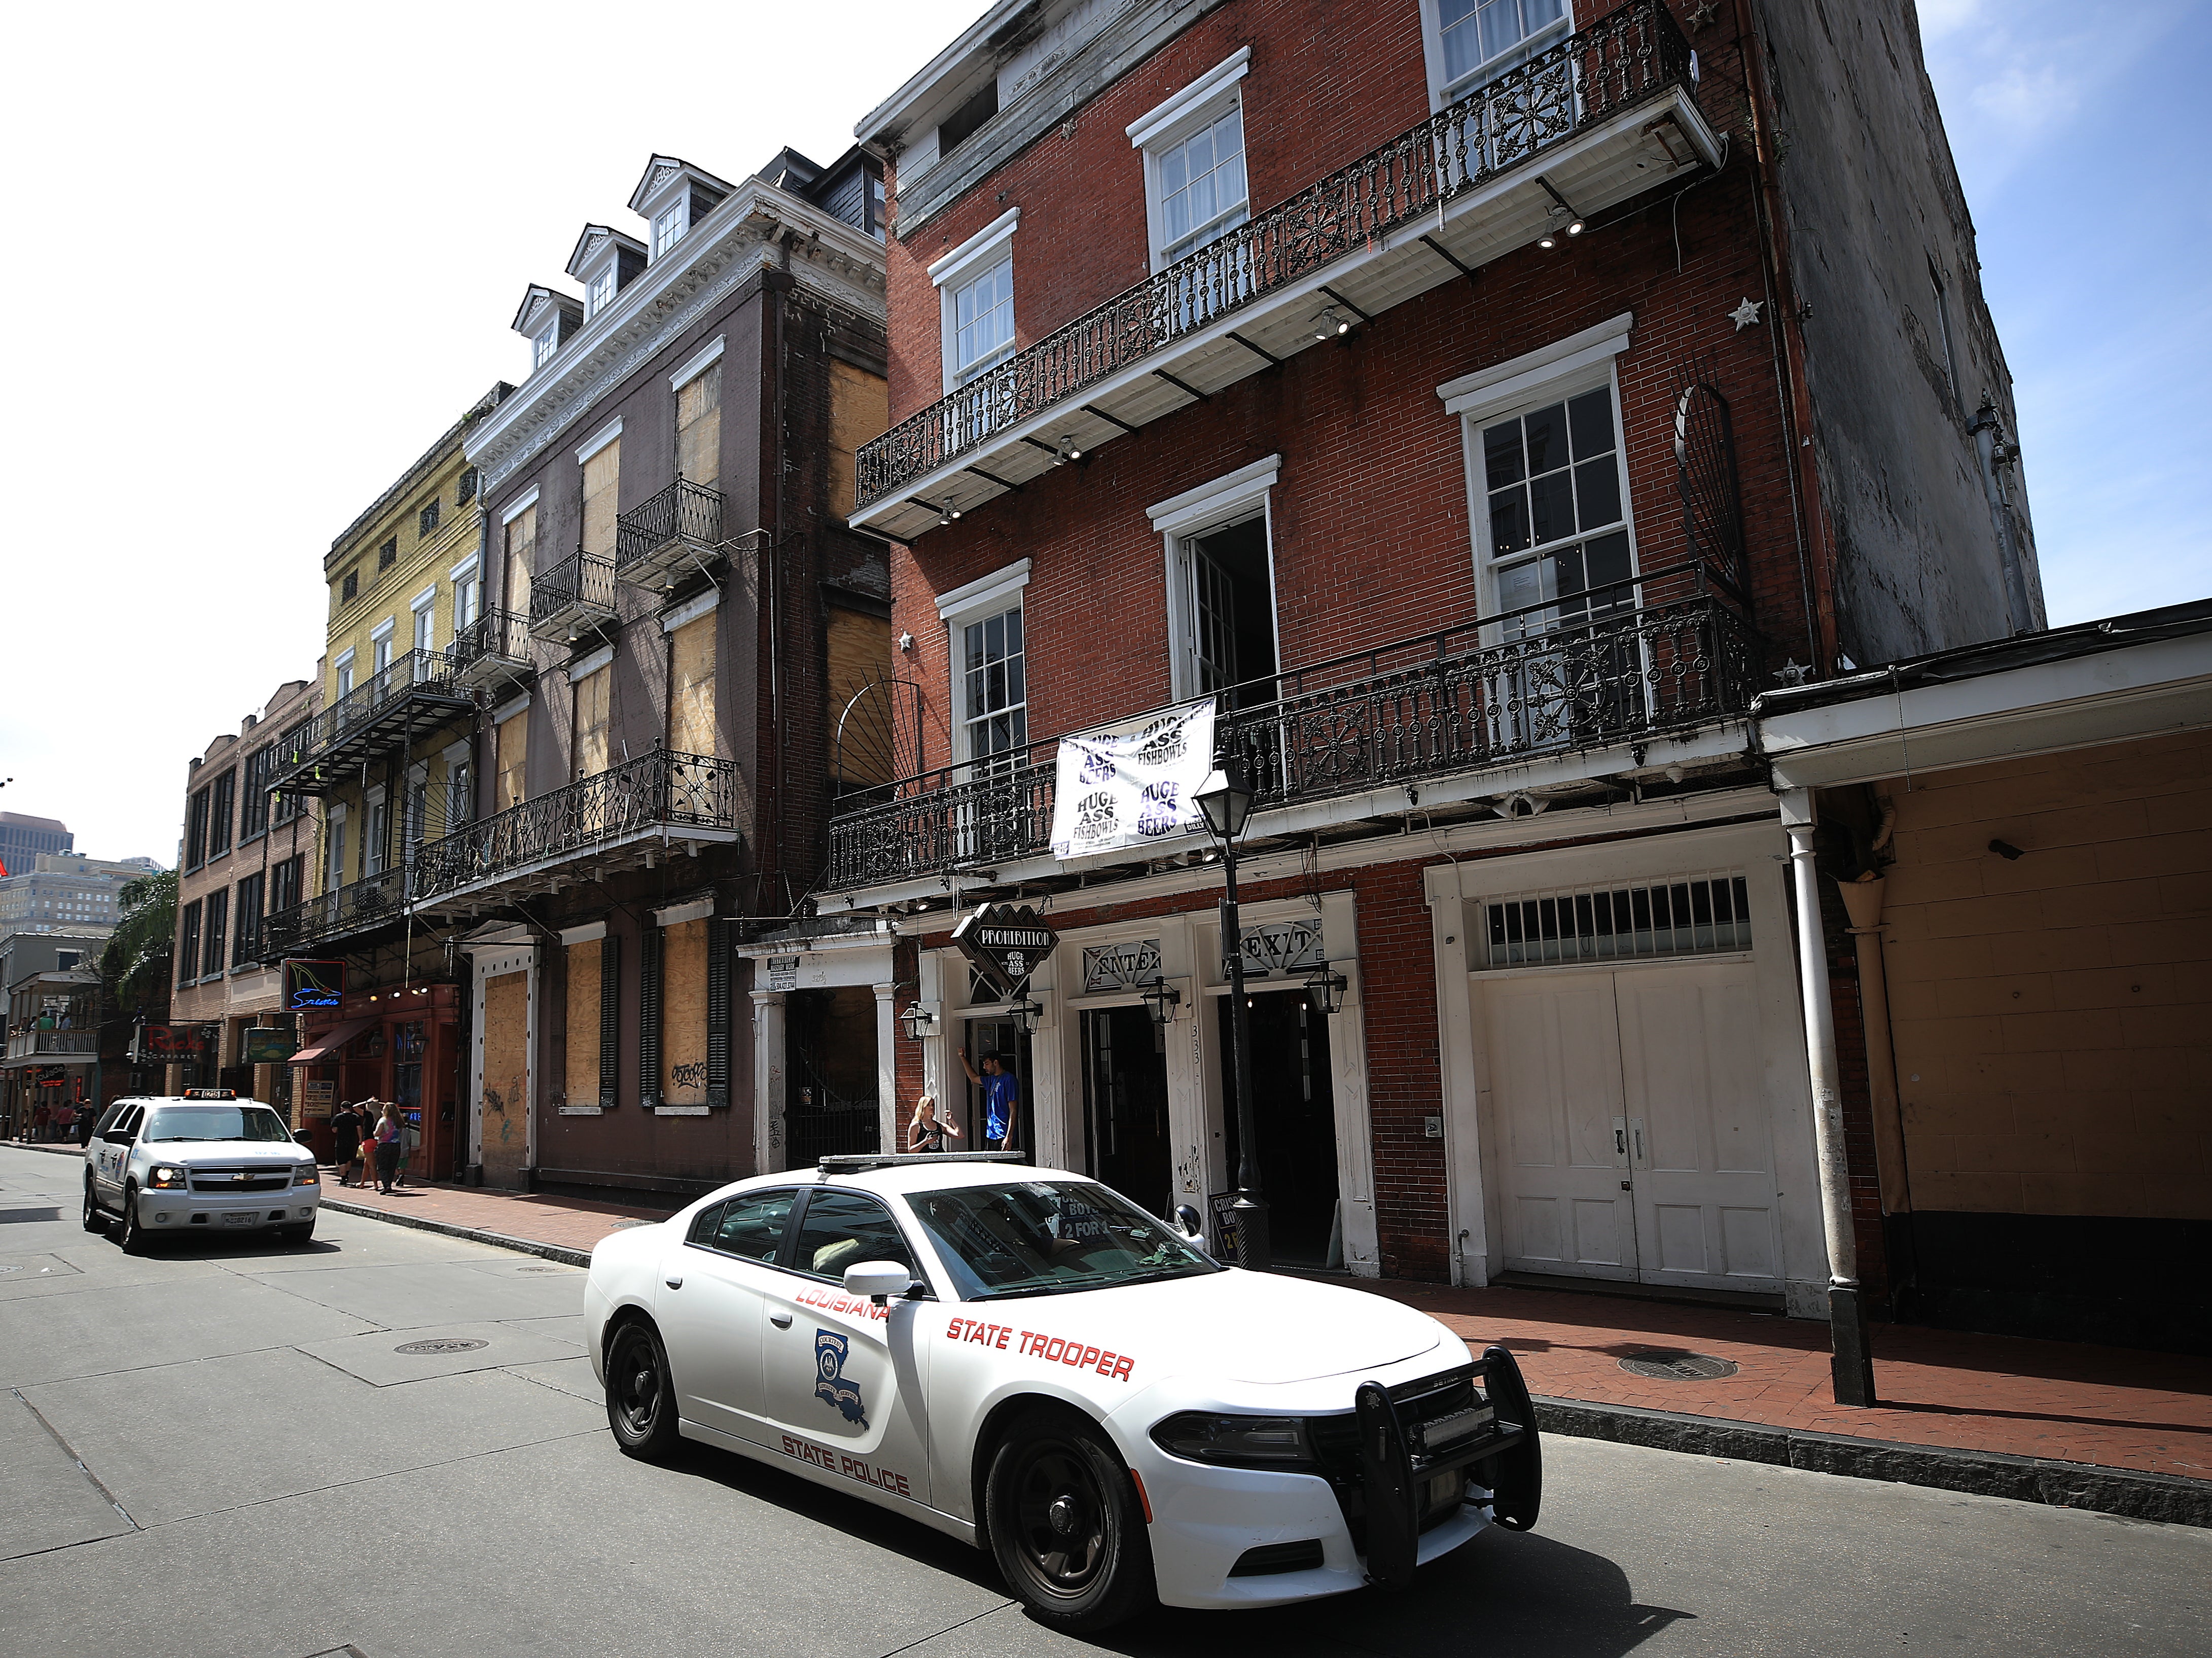 A State Trooper vehicle drives down Bourbon Street in the French Quarter on March 15, 2020 in New Orleans, Louisiana.